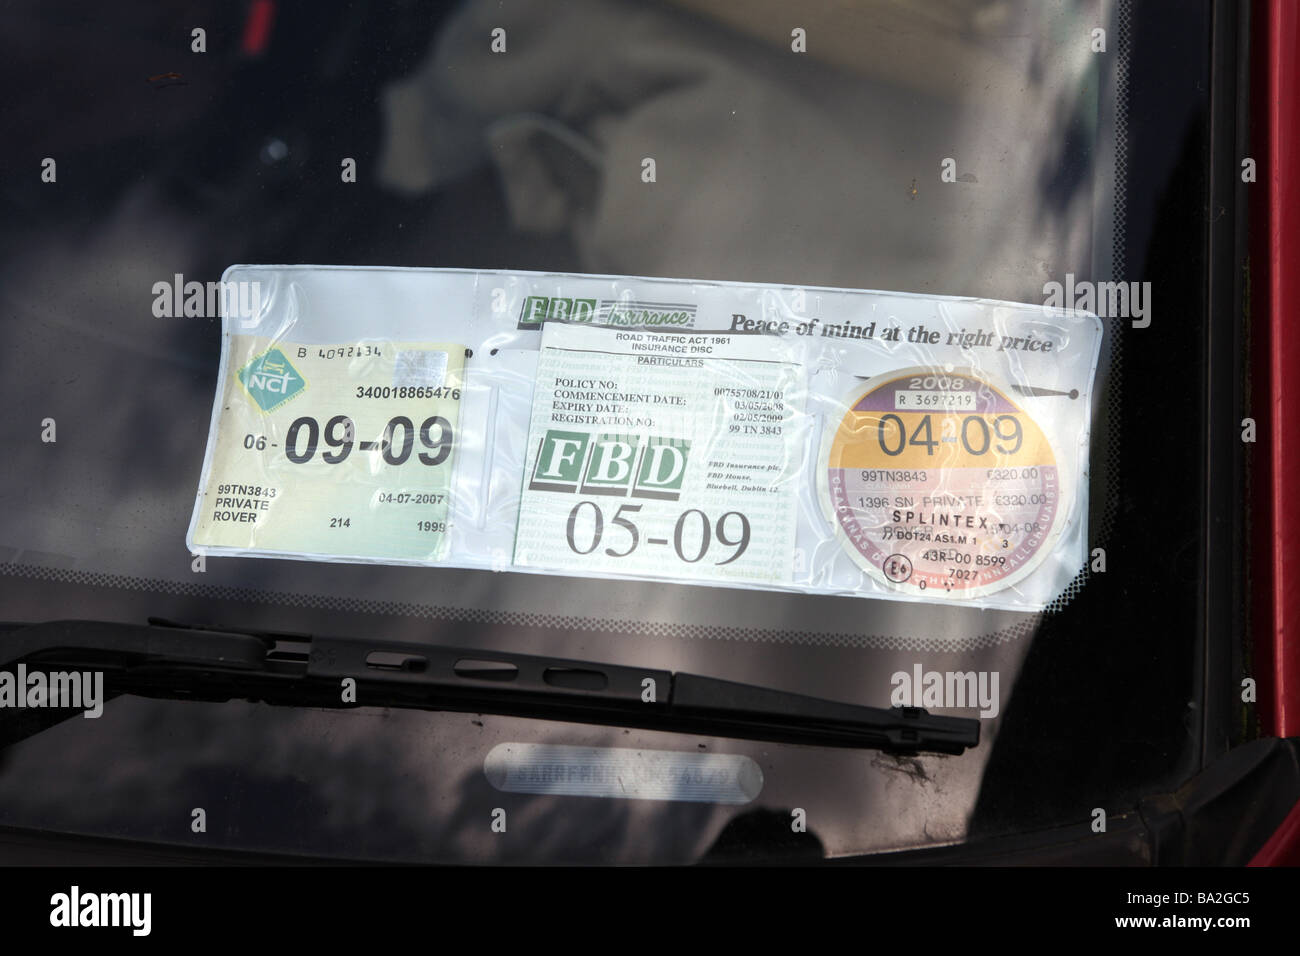 Irish car tax disk and insurance details posted on the windshield Stock Photo: 23413717 - Alamy